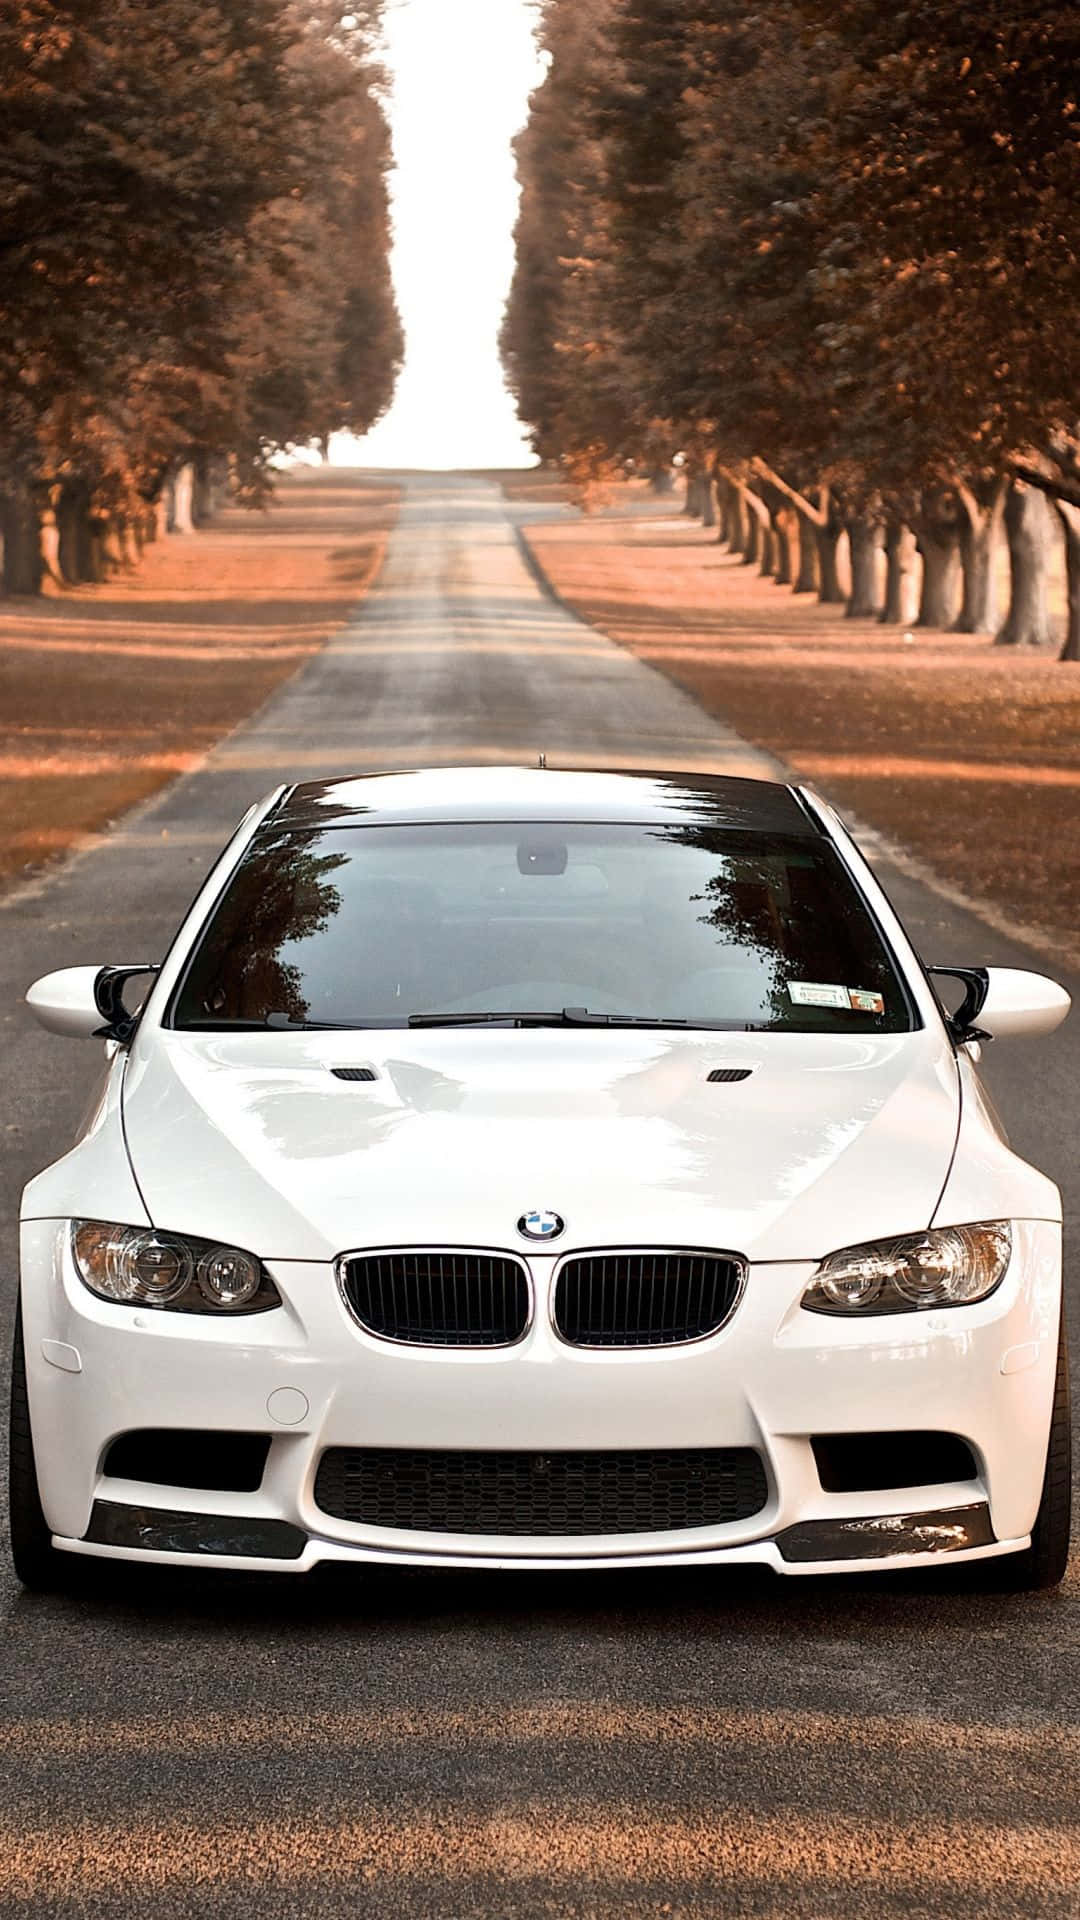 A White Bmw M3 Car Is Parked On A Road Wallpaper